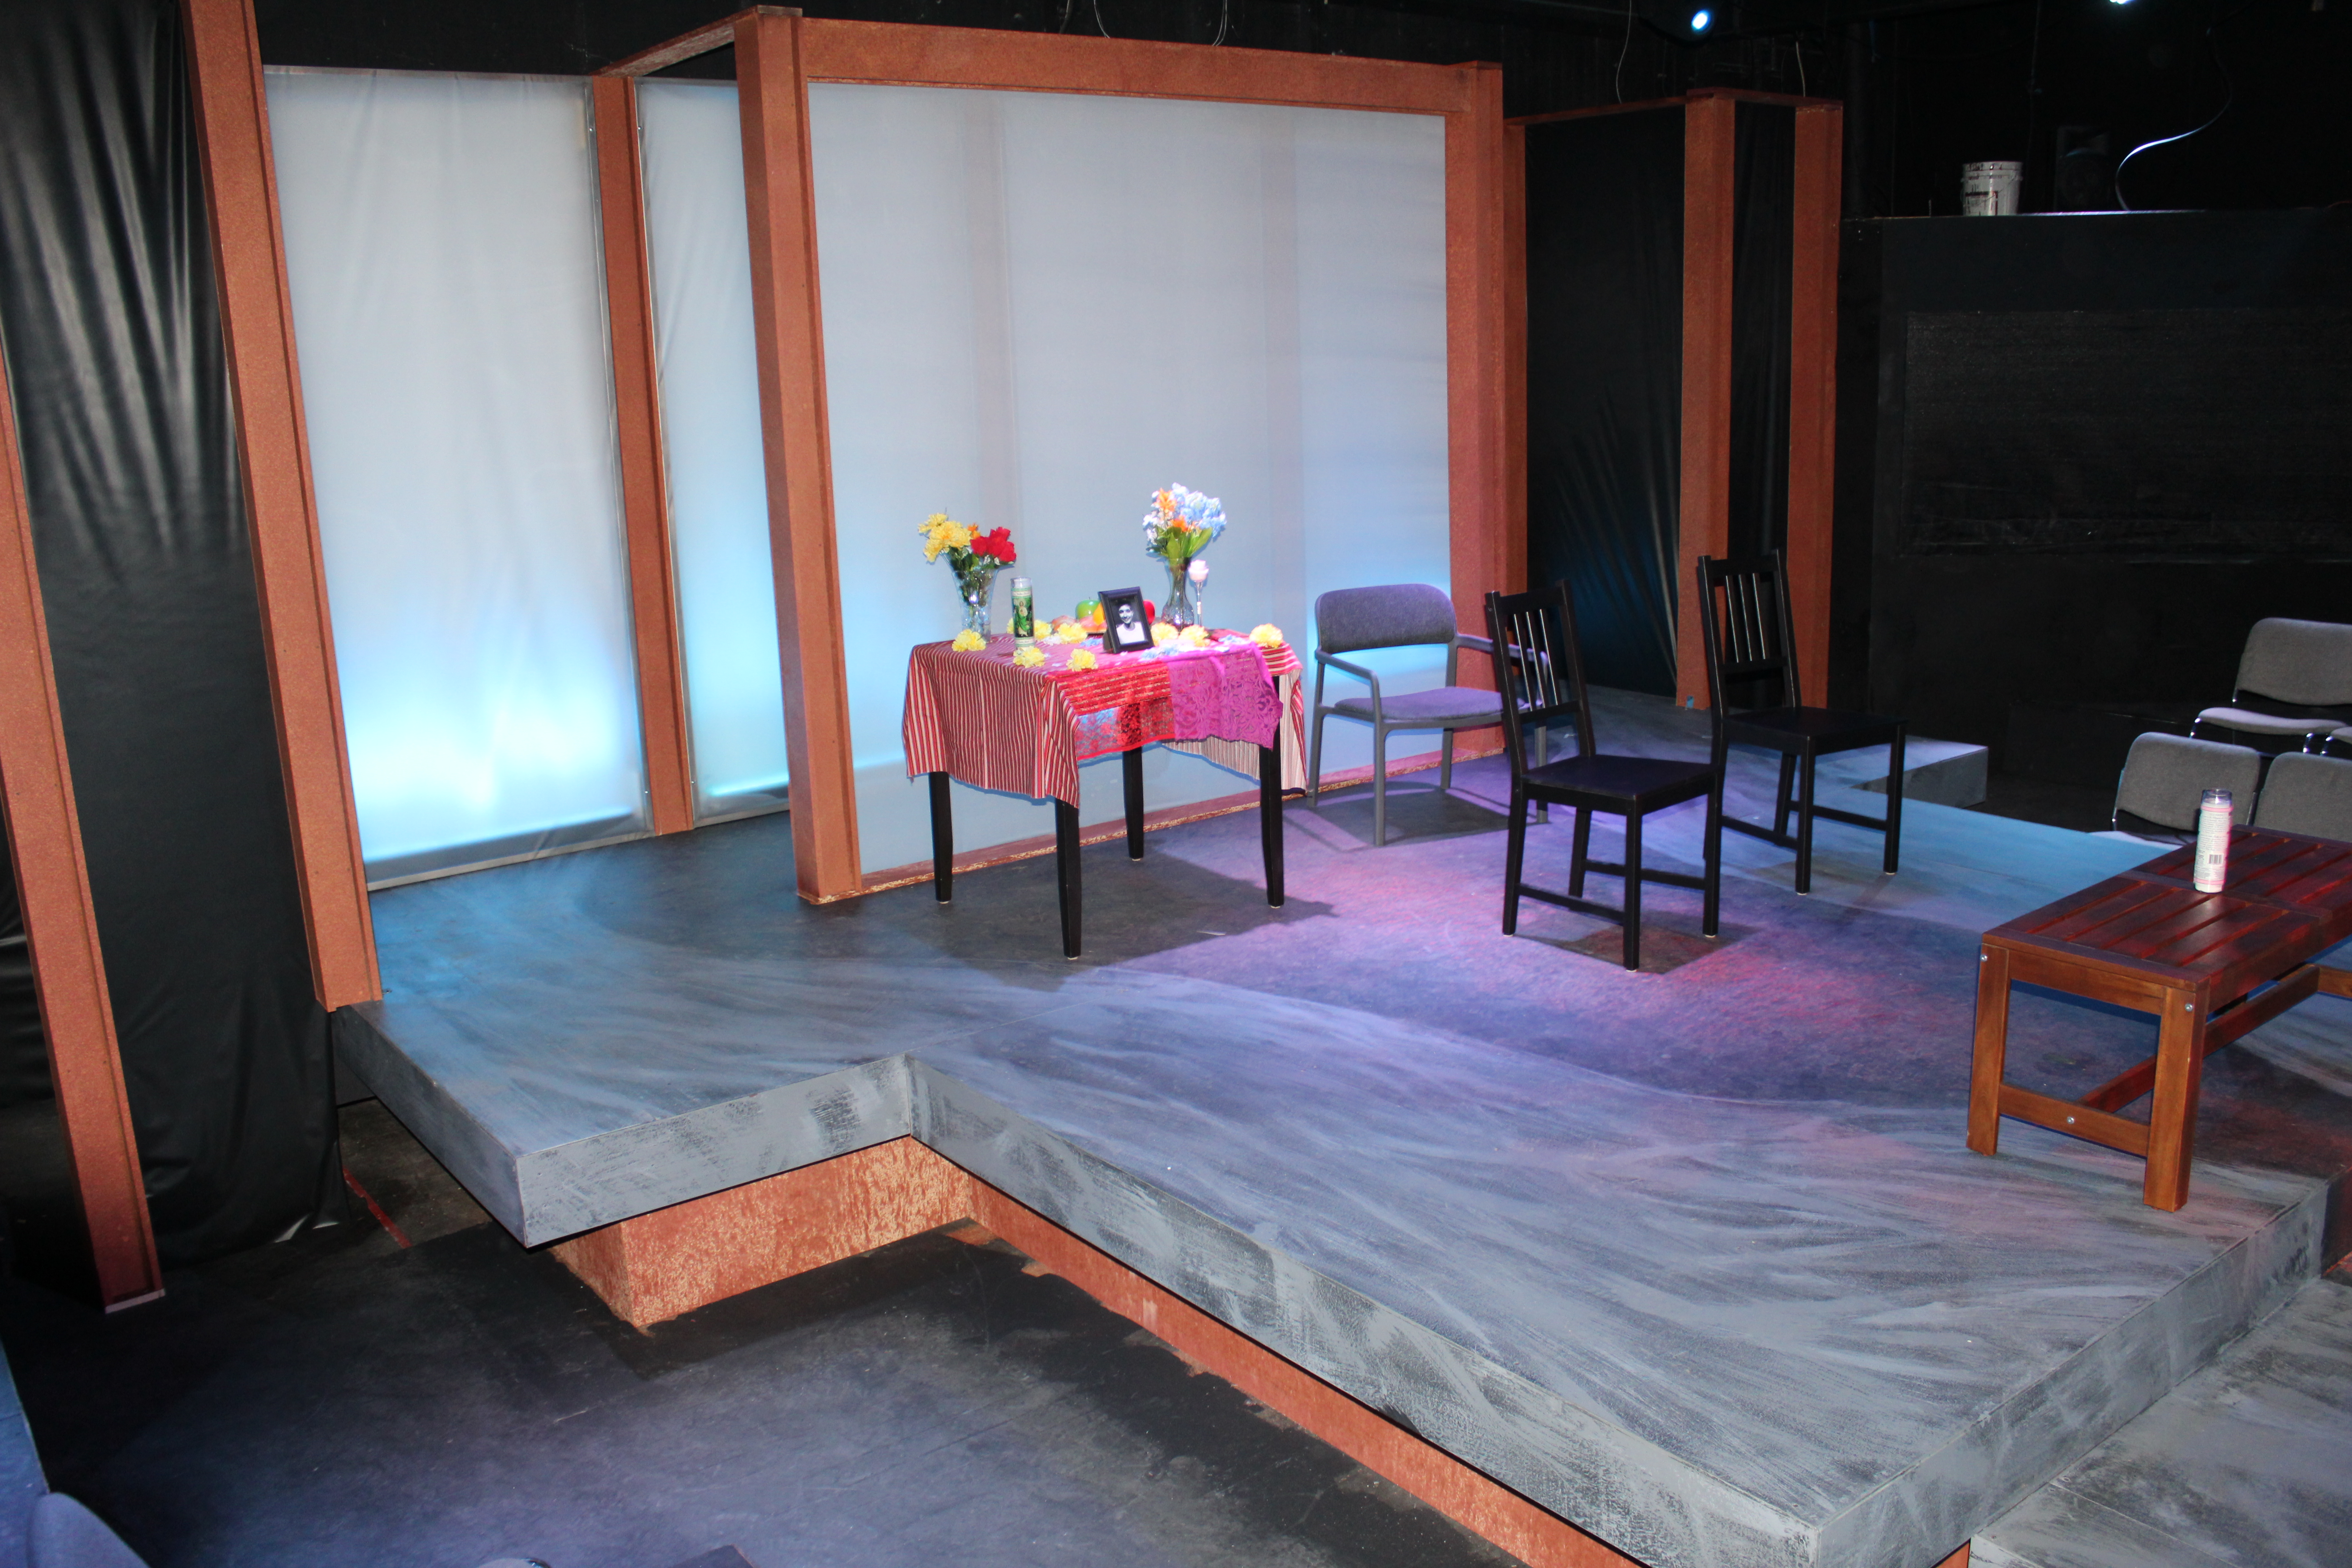 After Unexpected Delay, Undocumented Becomes More Intimate Theatrical Production